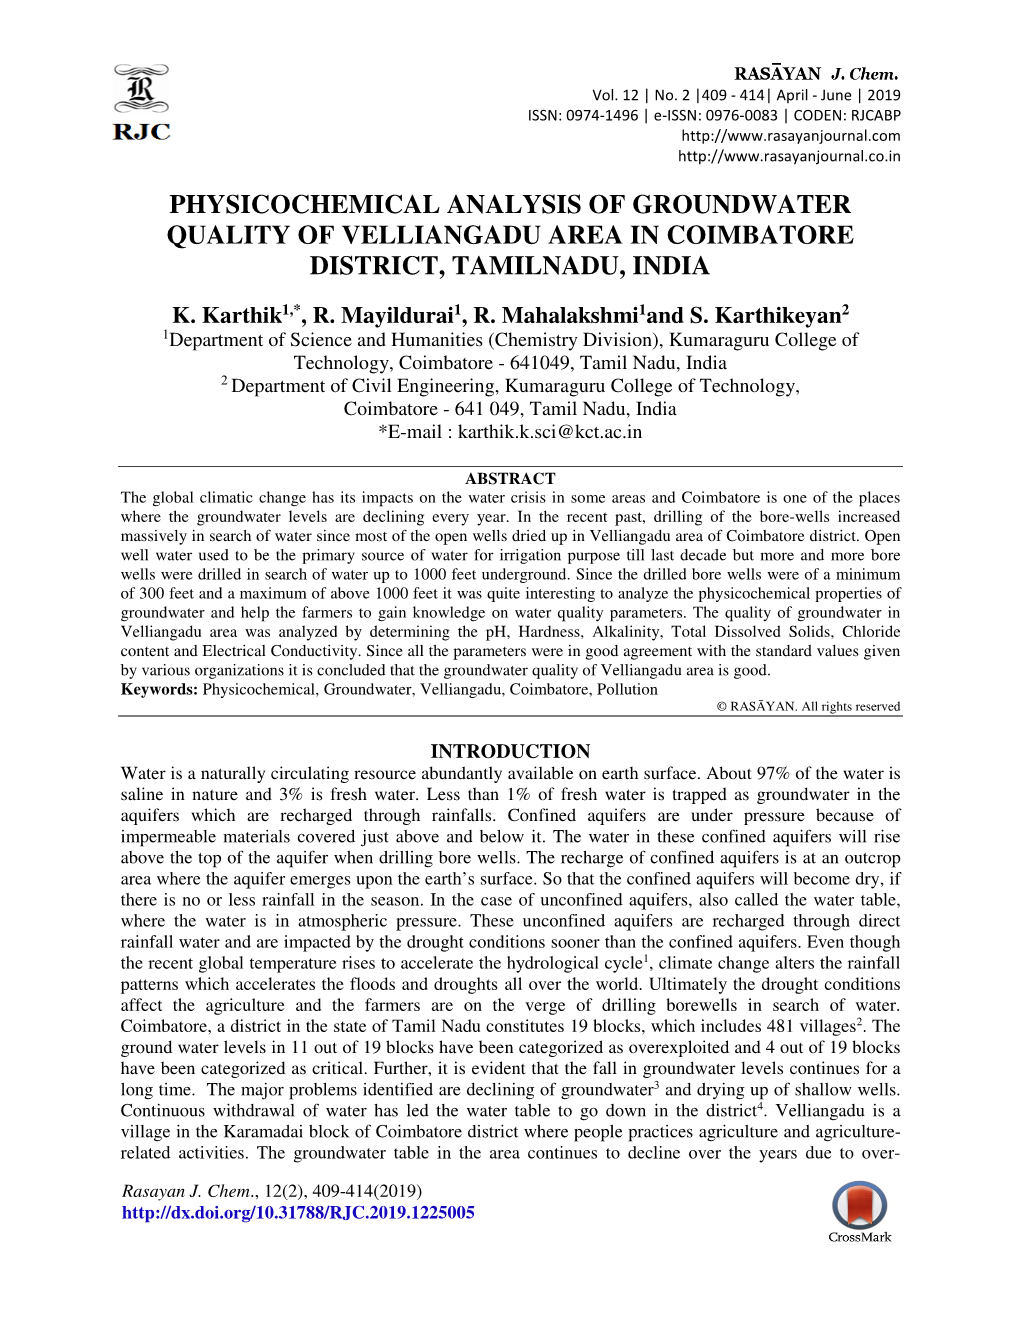 Physicochemical Analysis of Groundwater Quality of Velliangadu Area in Coimbatore District, Tamilnadu, India